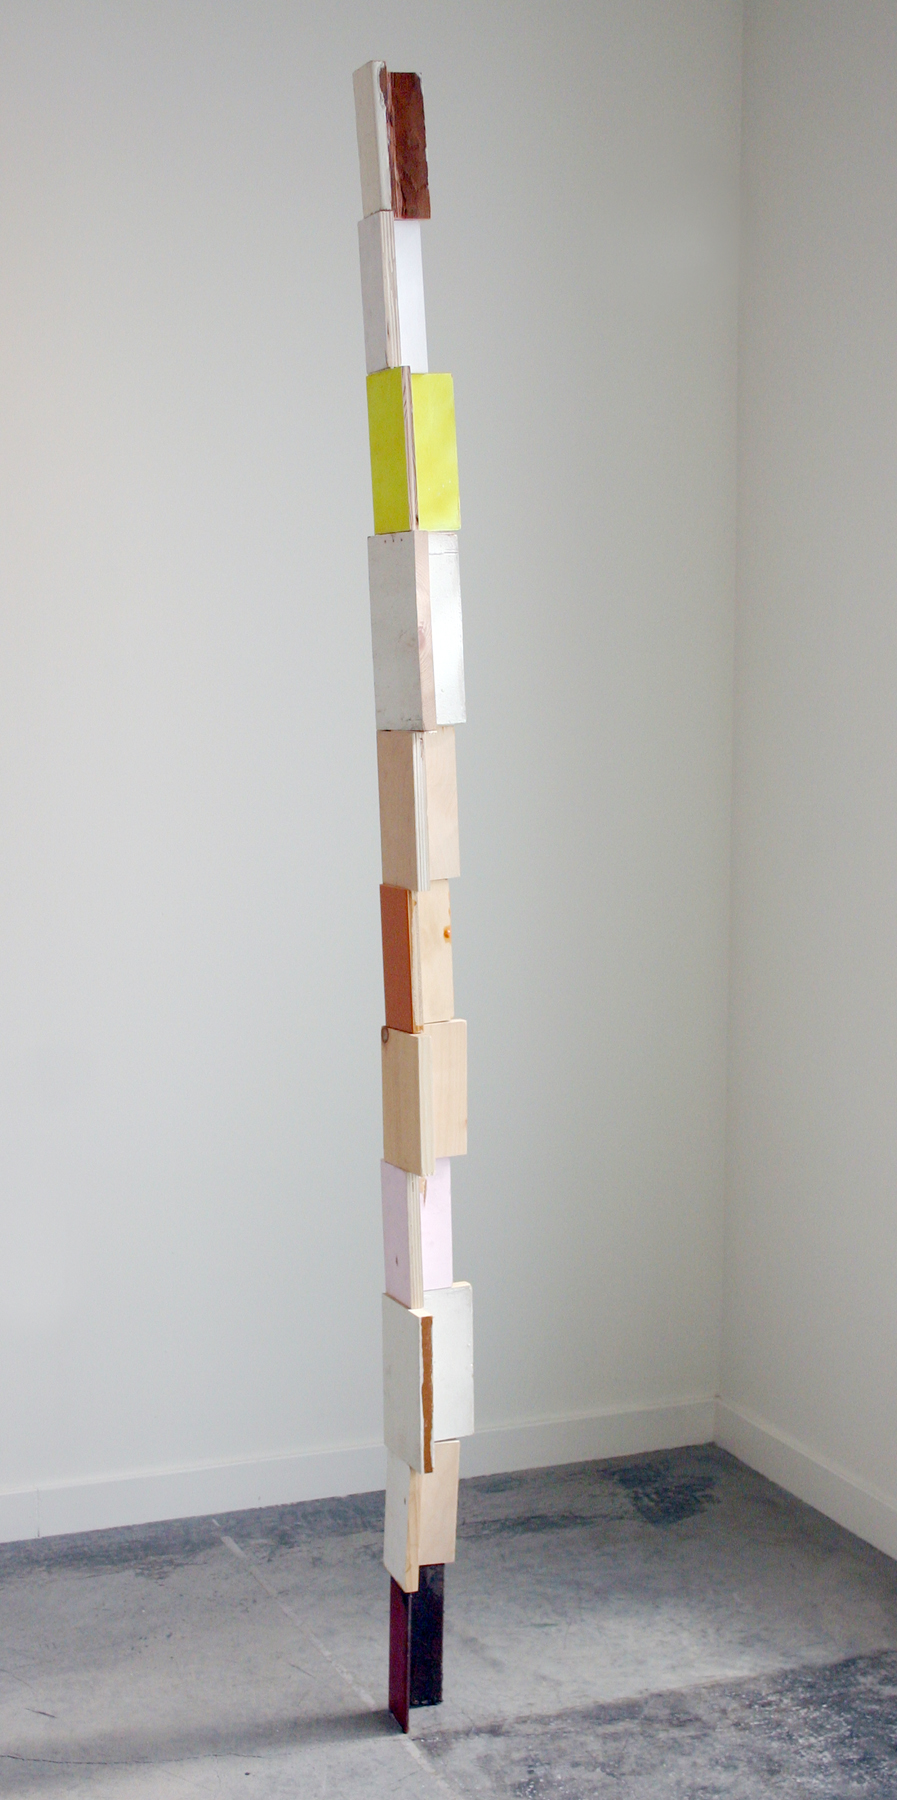   KIRK STOLLER   Untitled (corner),&nbsp; wood, paint, resin and steel, 82.25" x 5" x 5", 2011 